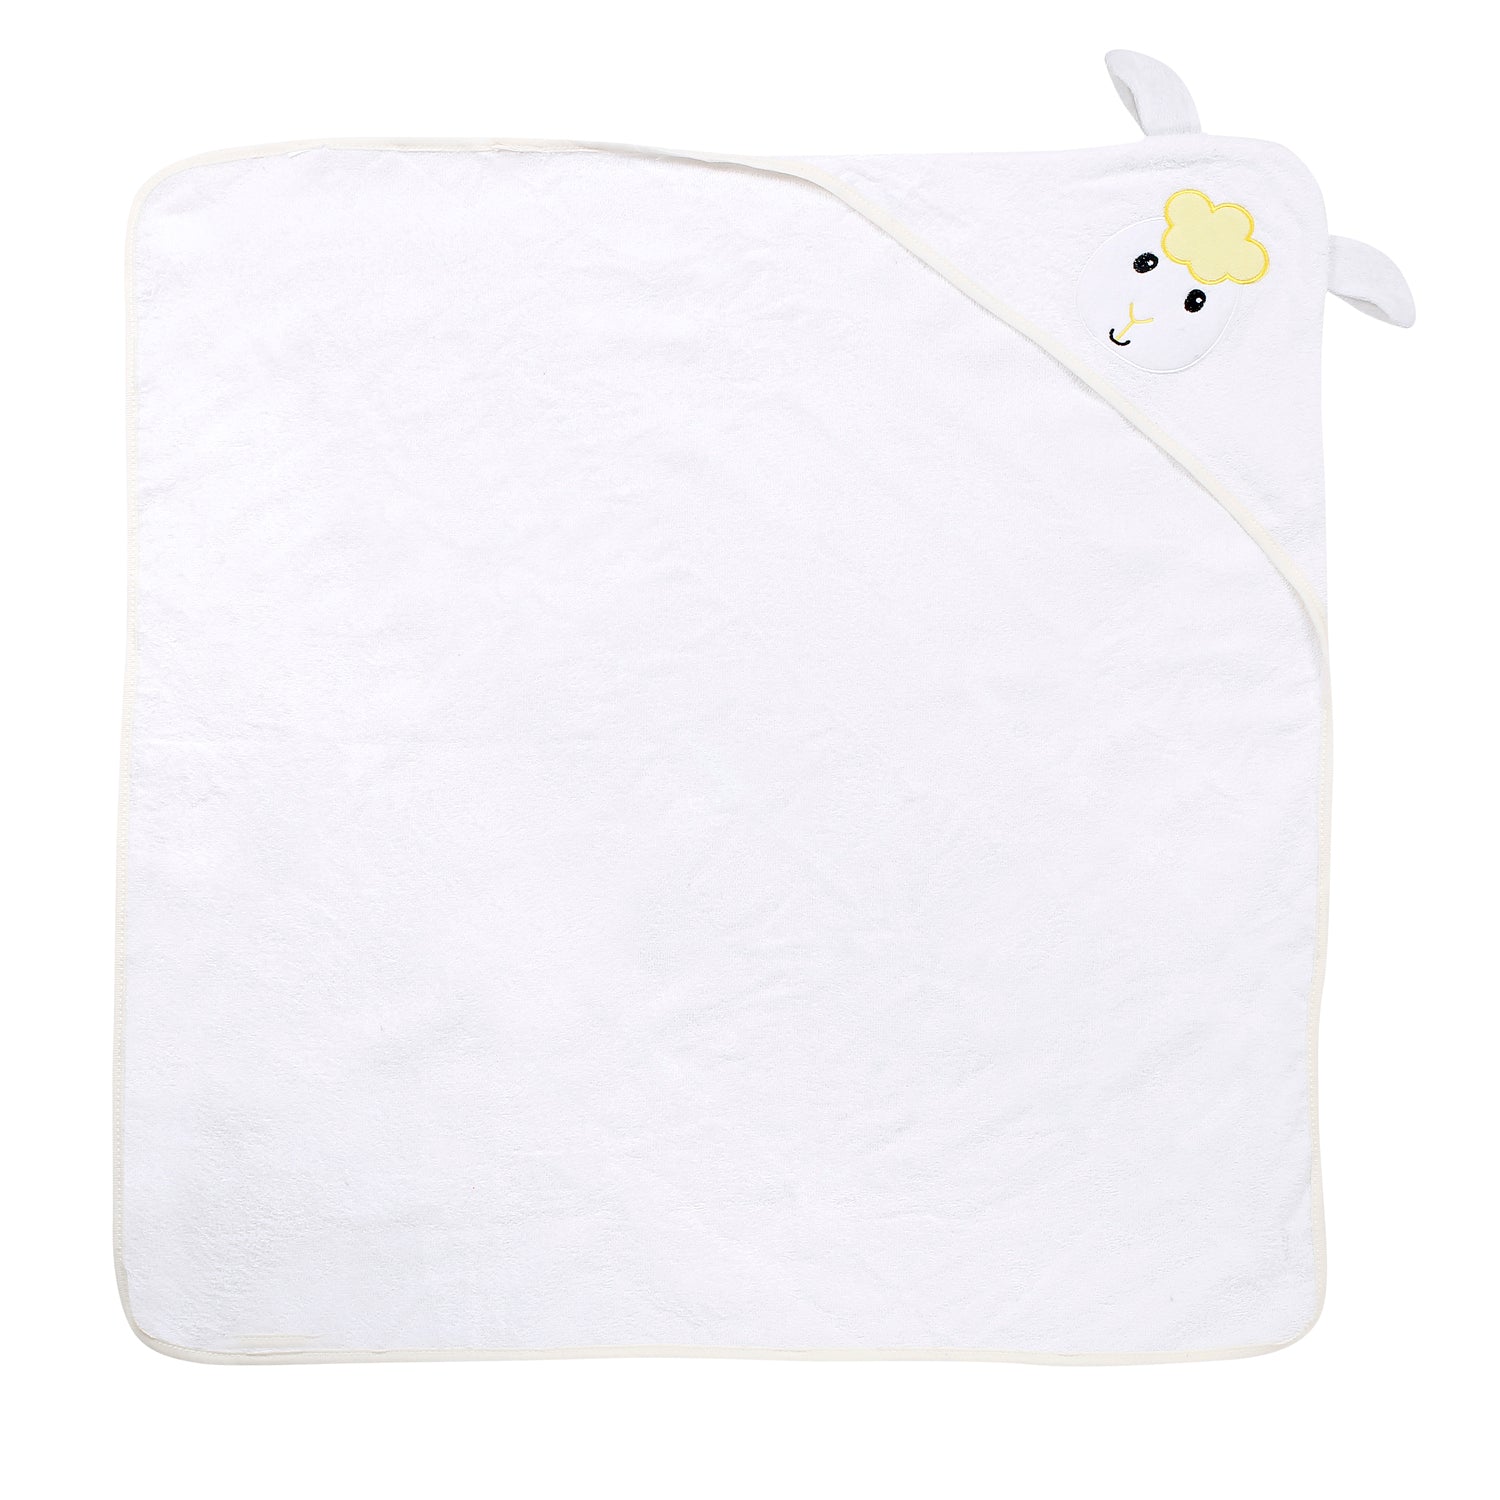 Goat White Hooded Towel - Baby Moo